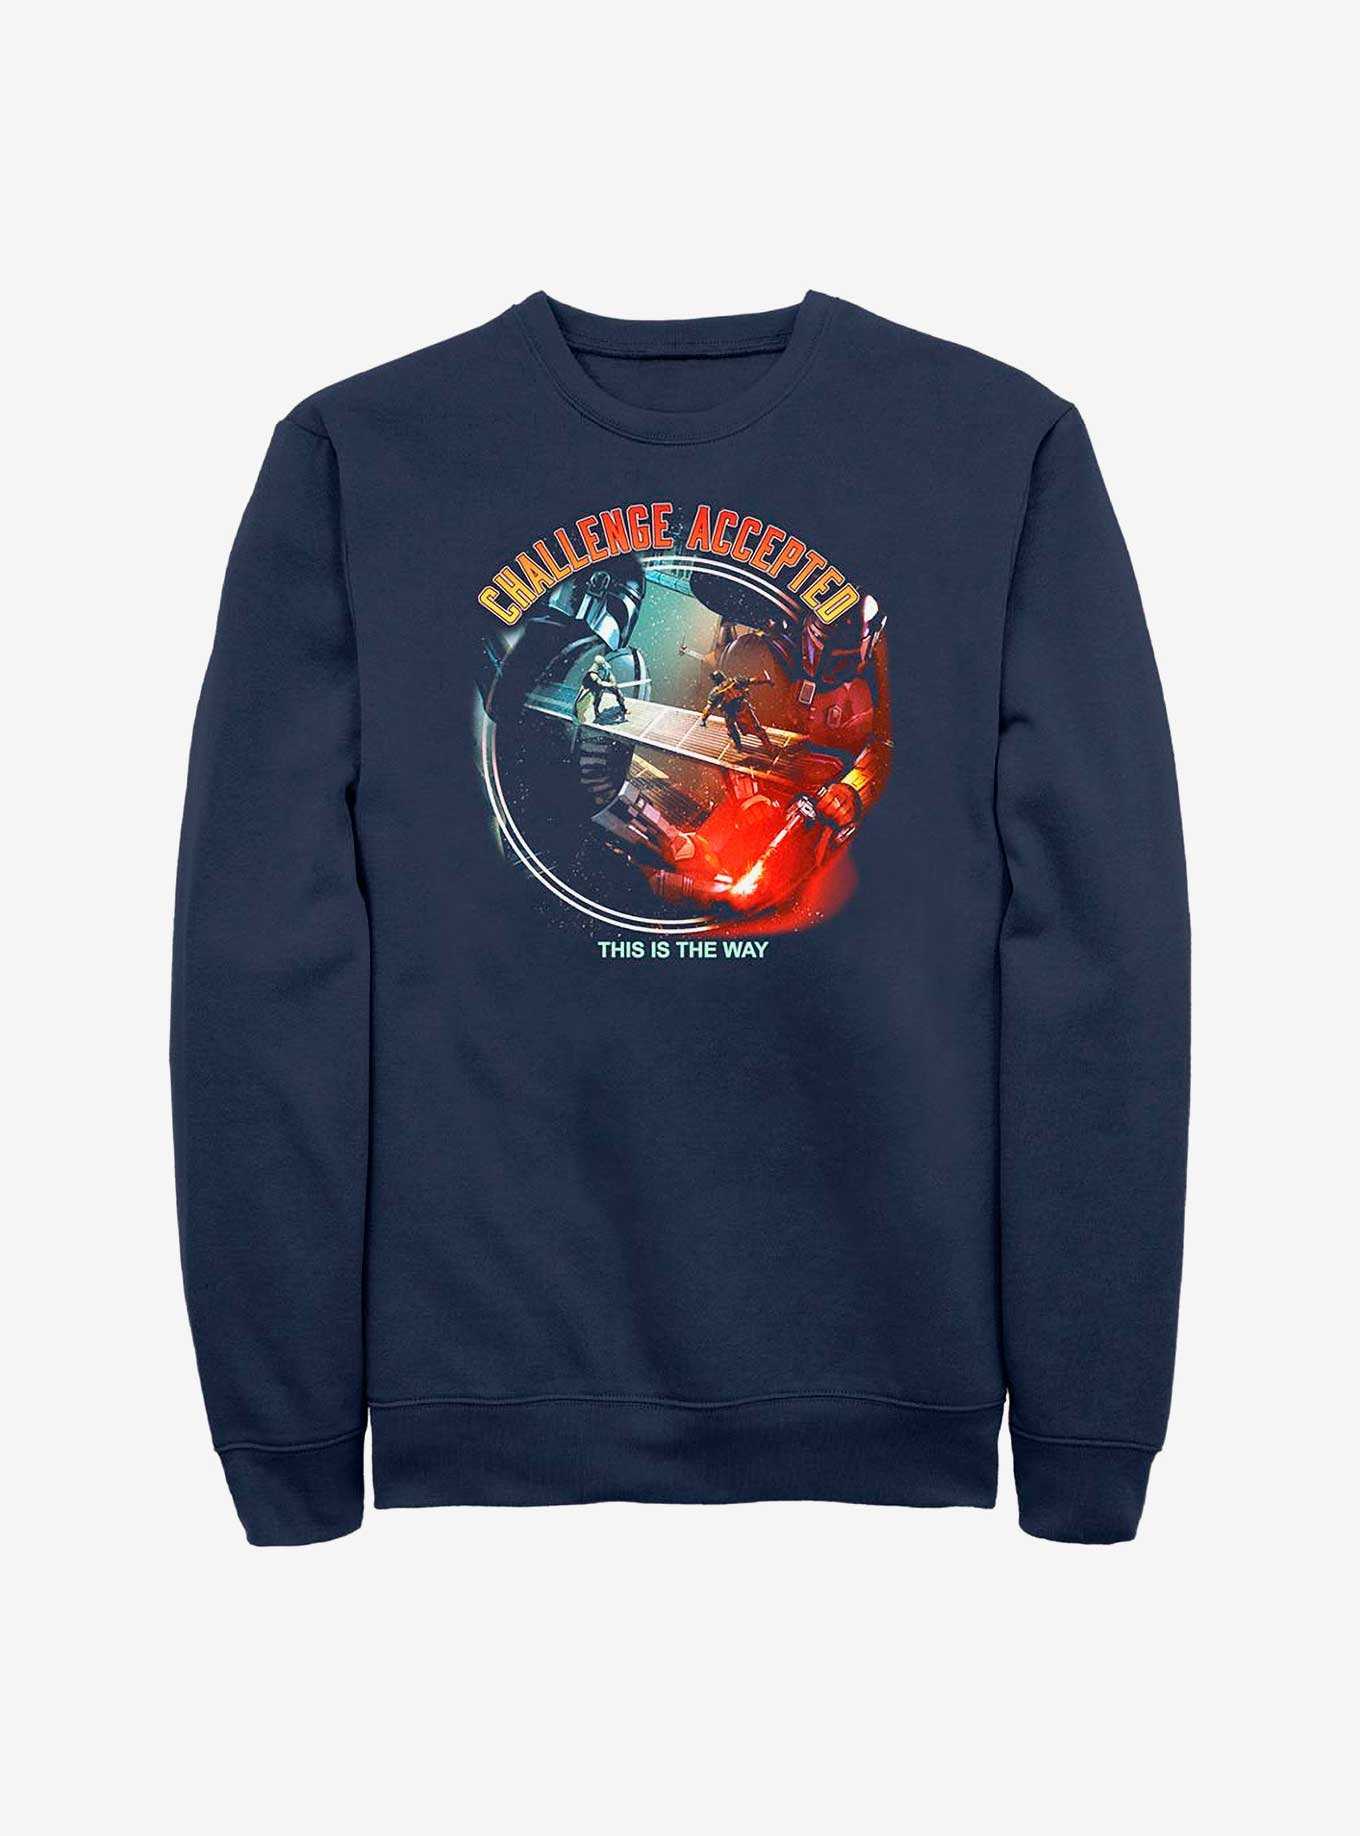 Star Wars The Book Of Boba Fett Challenge Accepted Sweatshirt, , hi-res